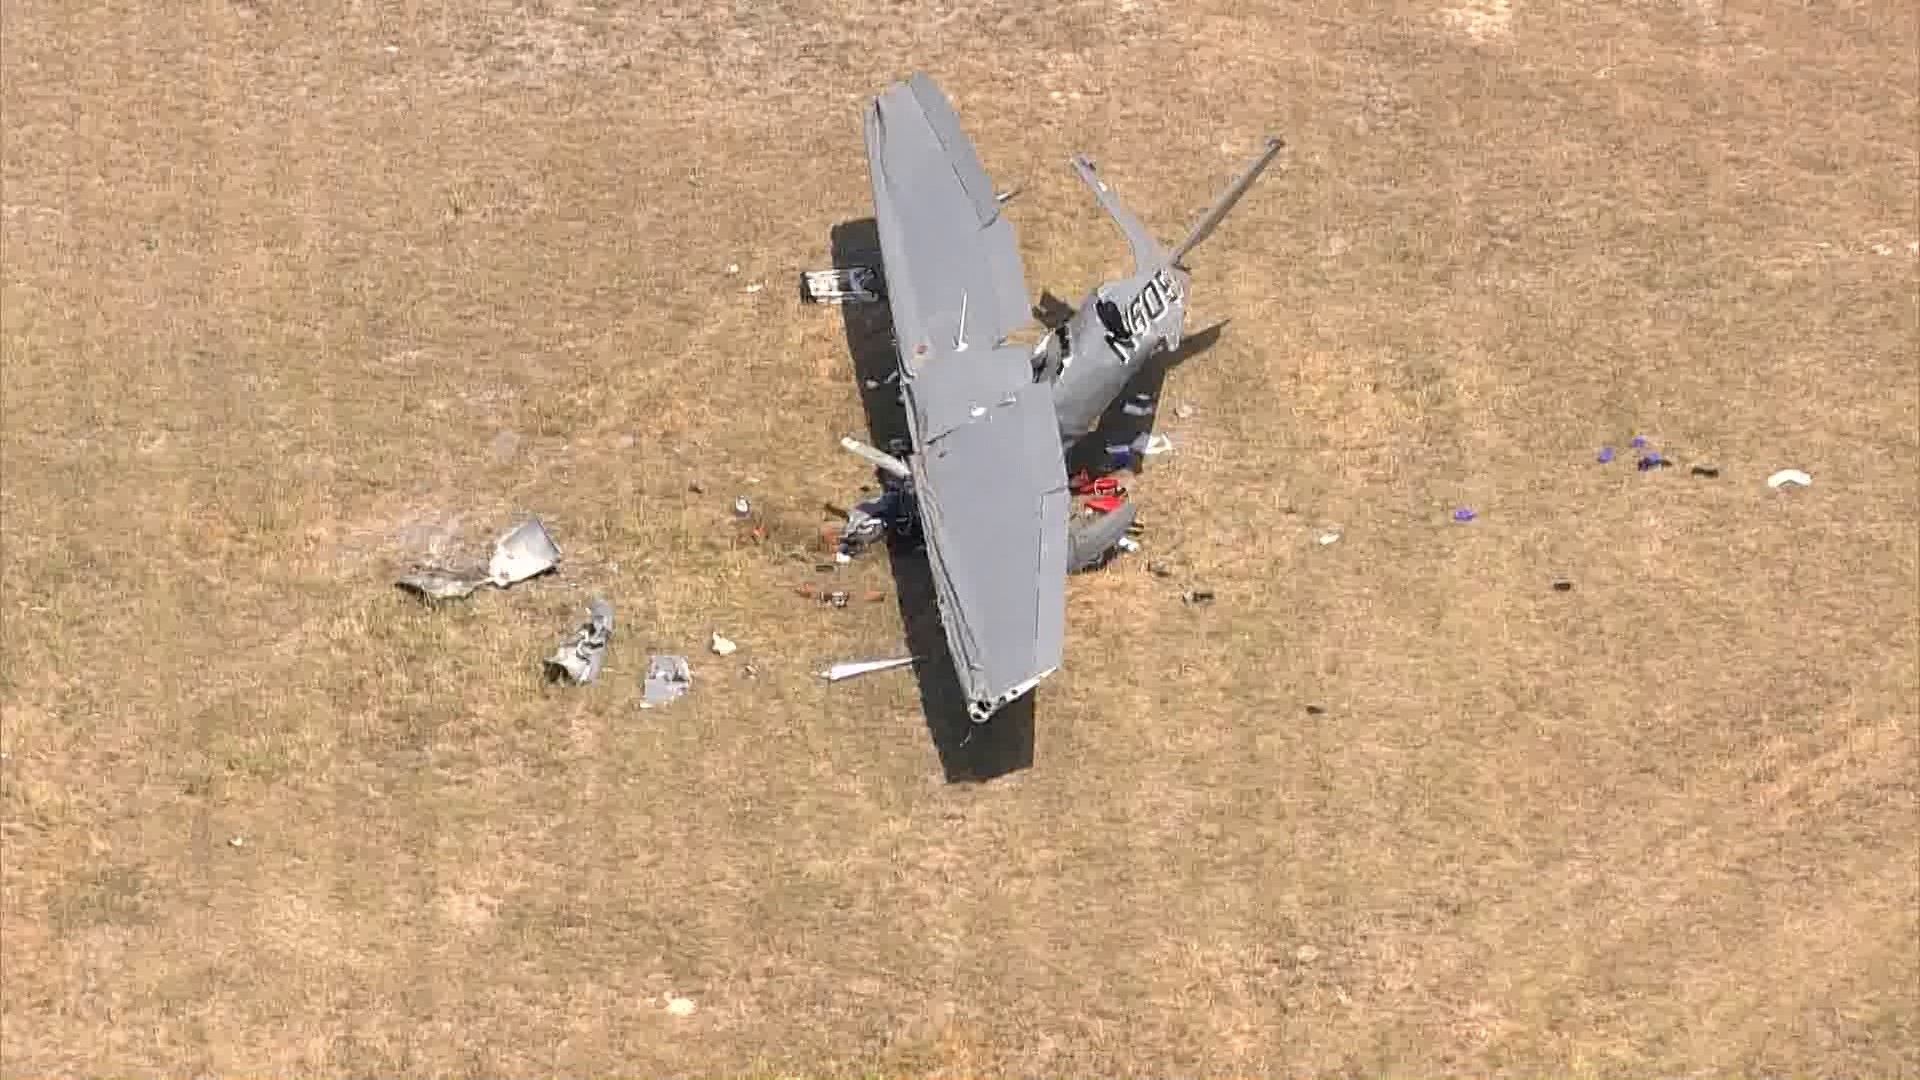 Officials said two men were onboard the Cessna before it crashed.